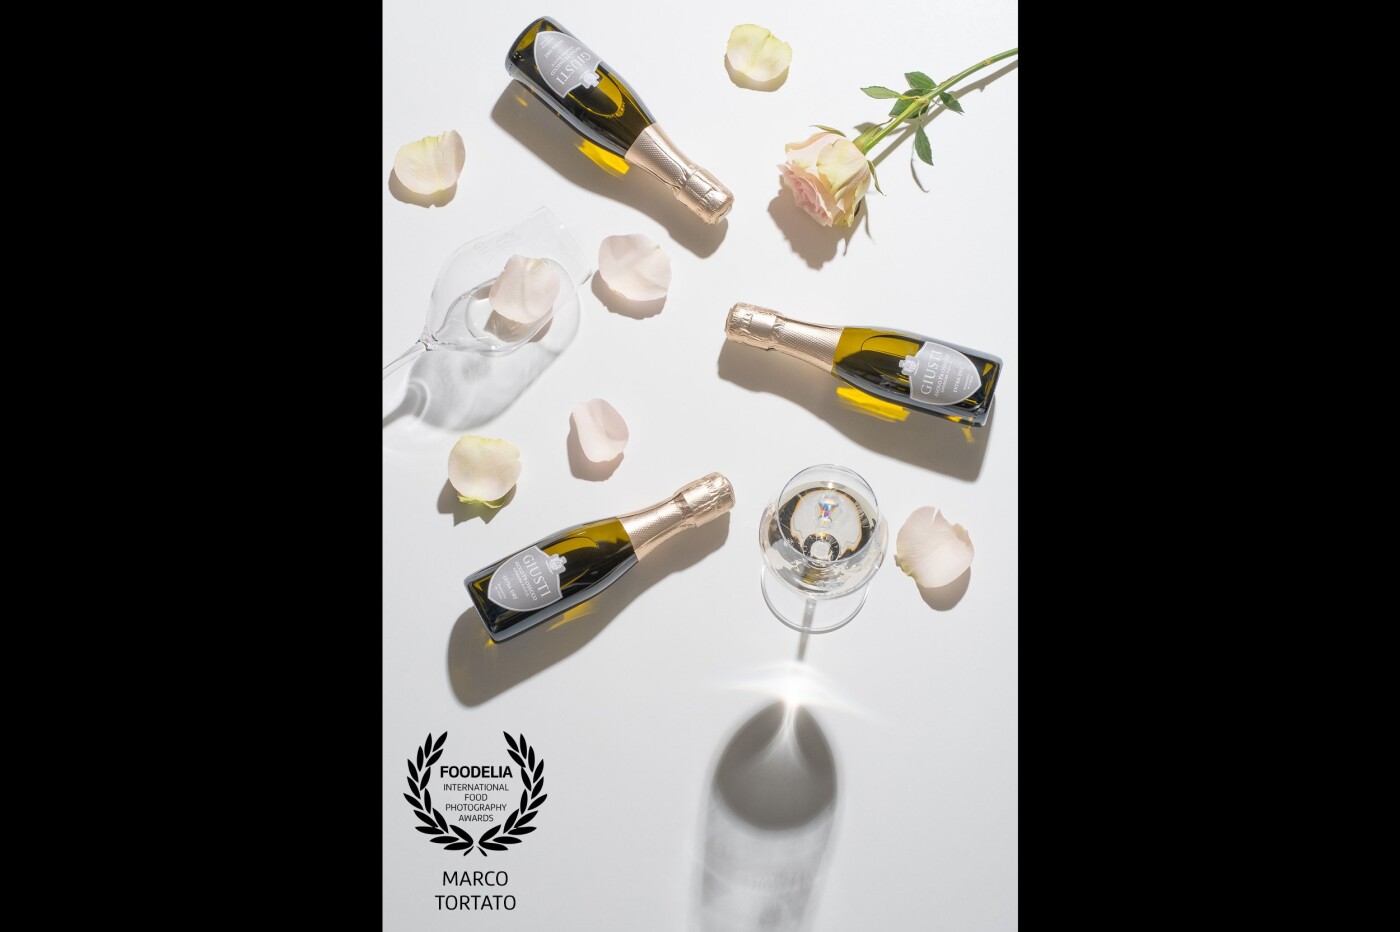 Giusti Wine - Asolo Prosecco Extra Dry  200ml<br />
Advertising Campaign for Summer 2020<br />
Marco Tortato Food and Beverage Commercial and Editorial photographer<br />
Treviso - Italy<br />
marcotortato.it